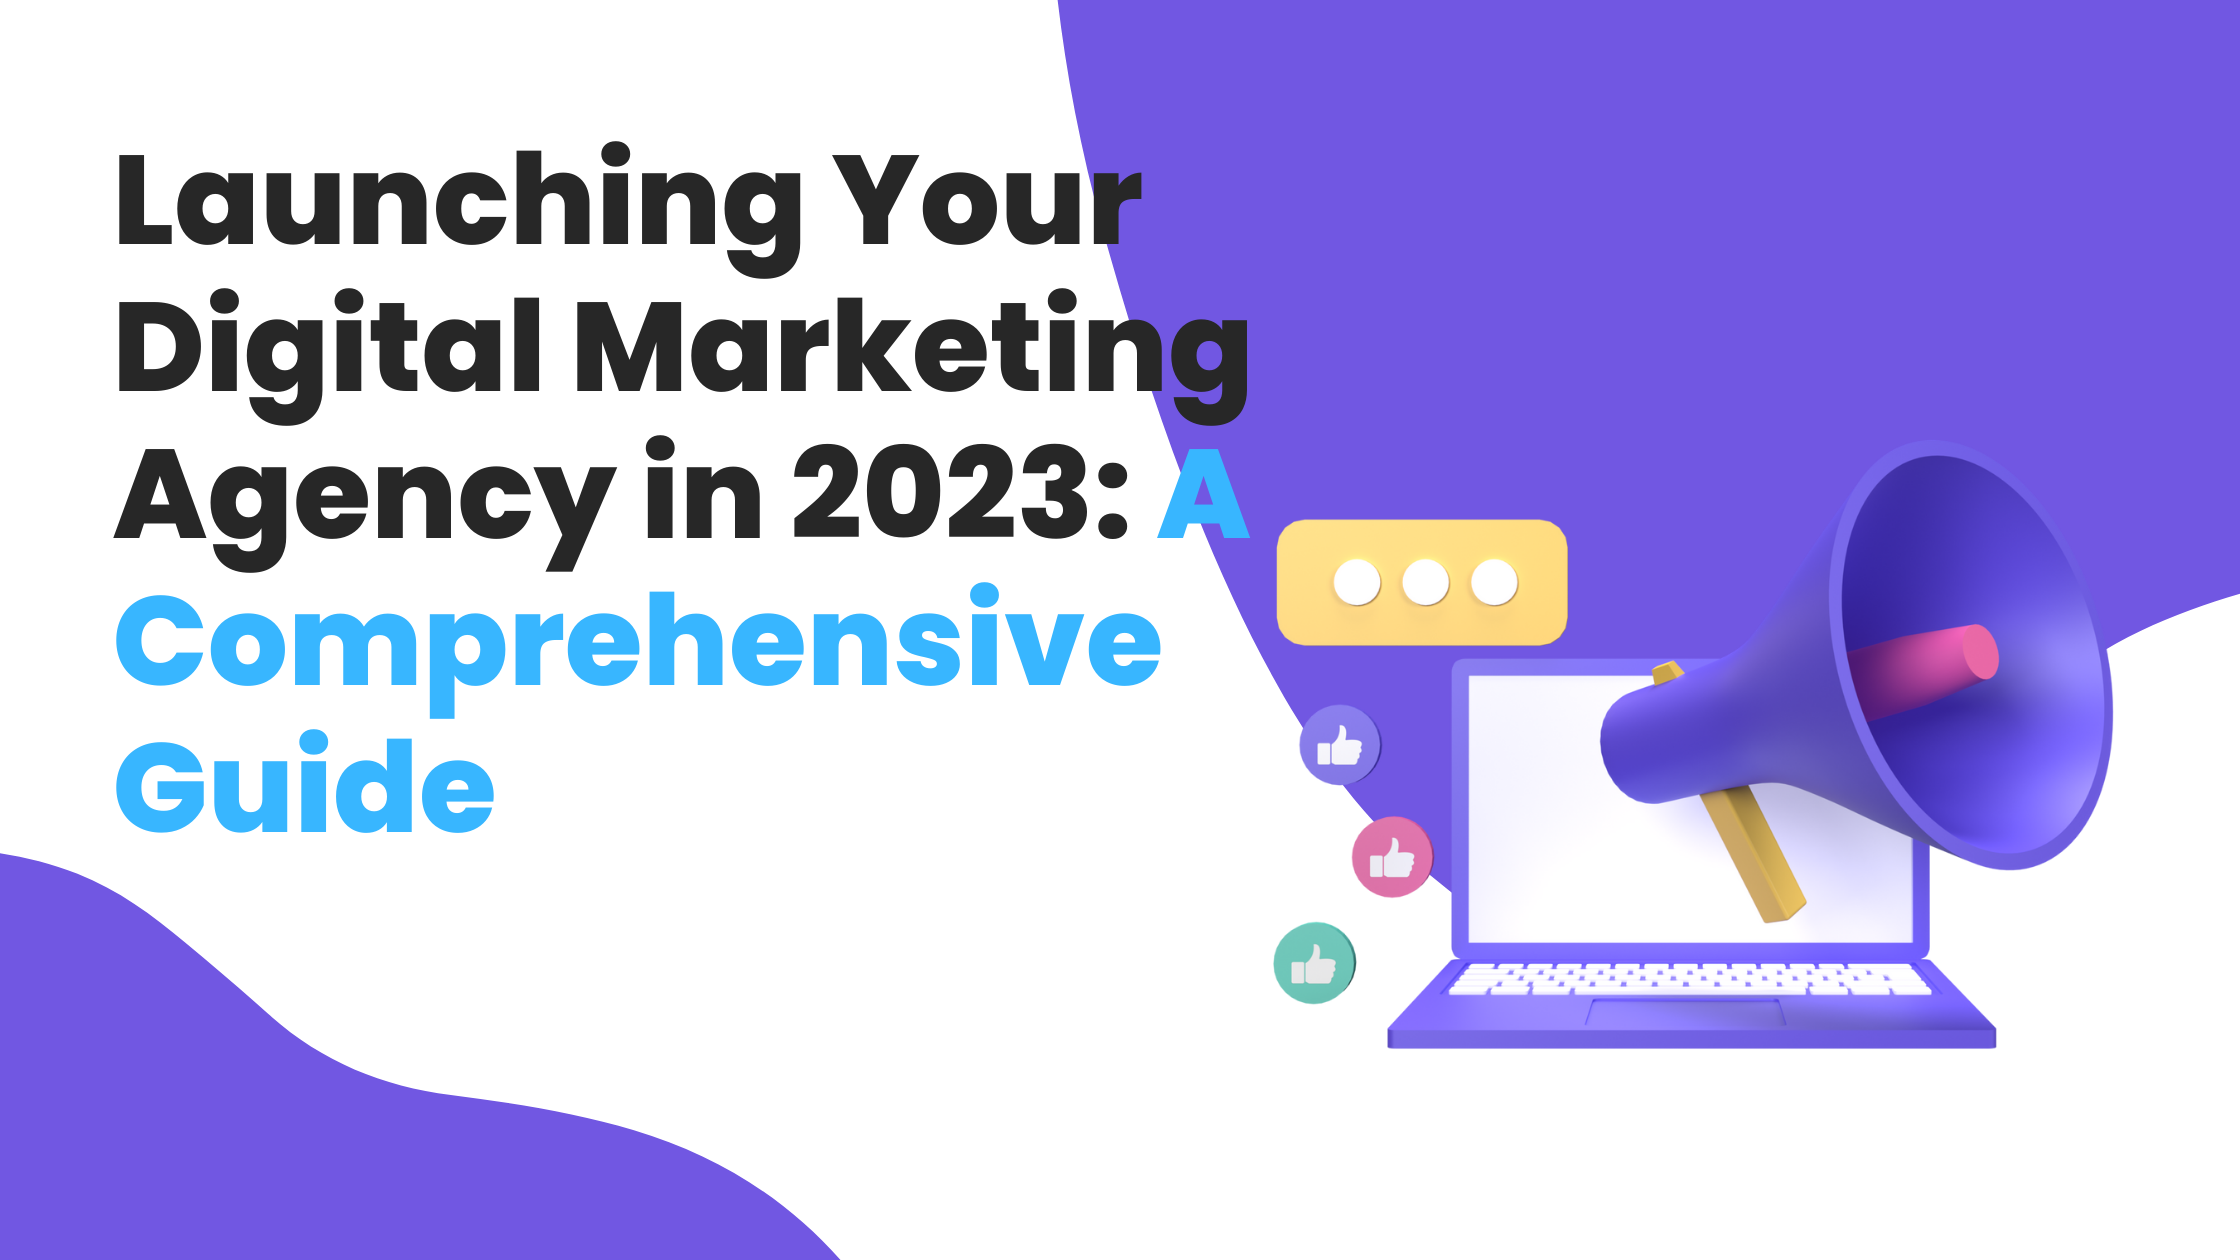 Launching Your Digital Marketing Agency in 2023: A Comprehensive Guide